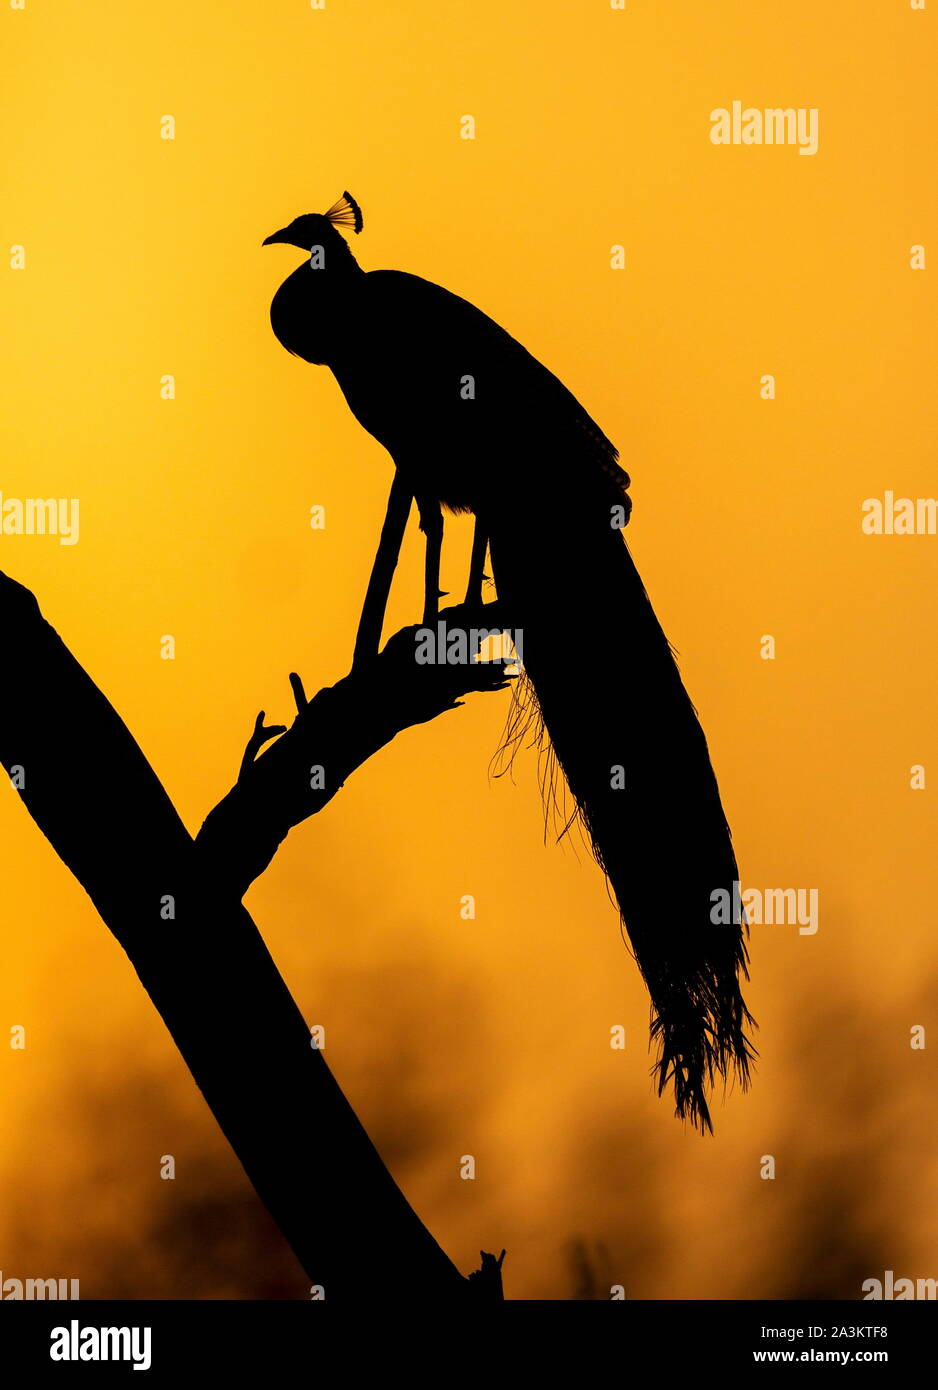 Peacock silhoutte, Bharatpur, Rajasthan, India Stock Photo